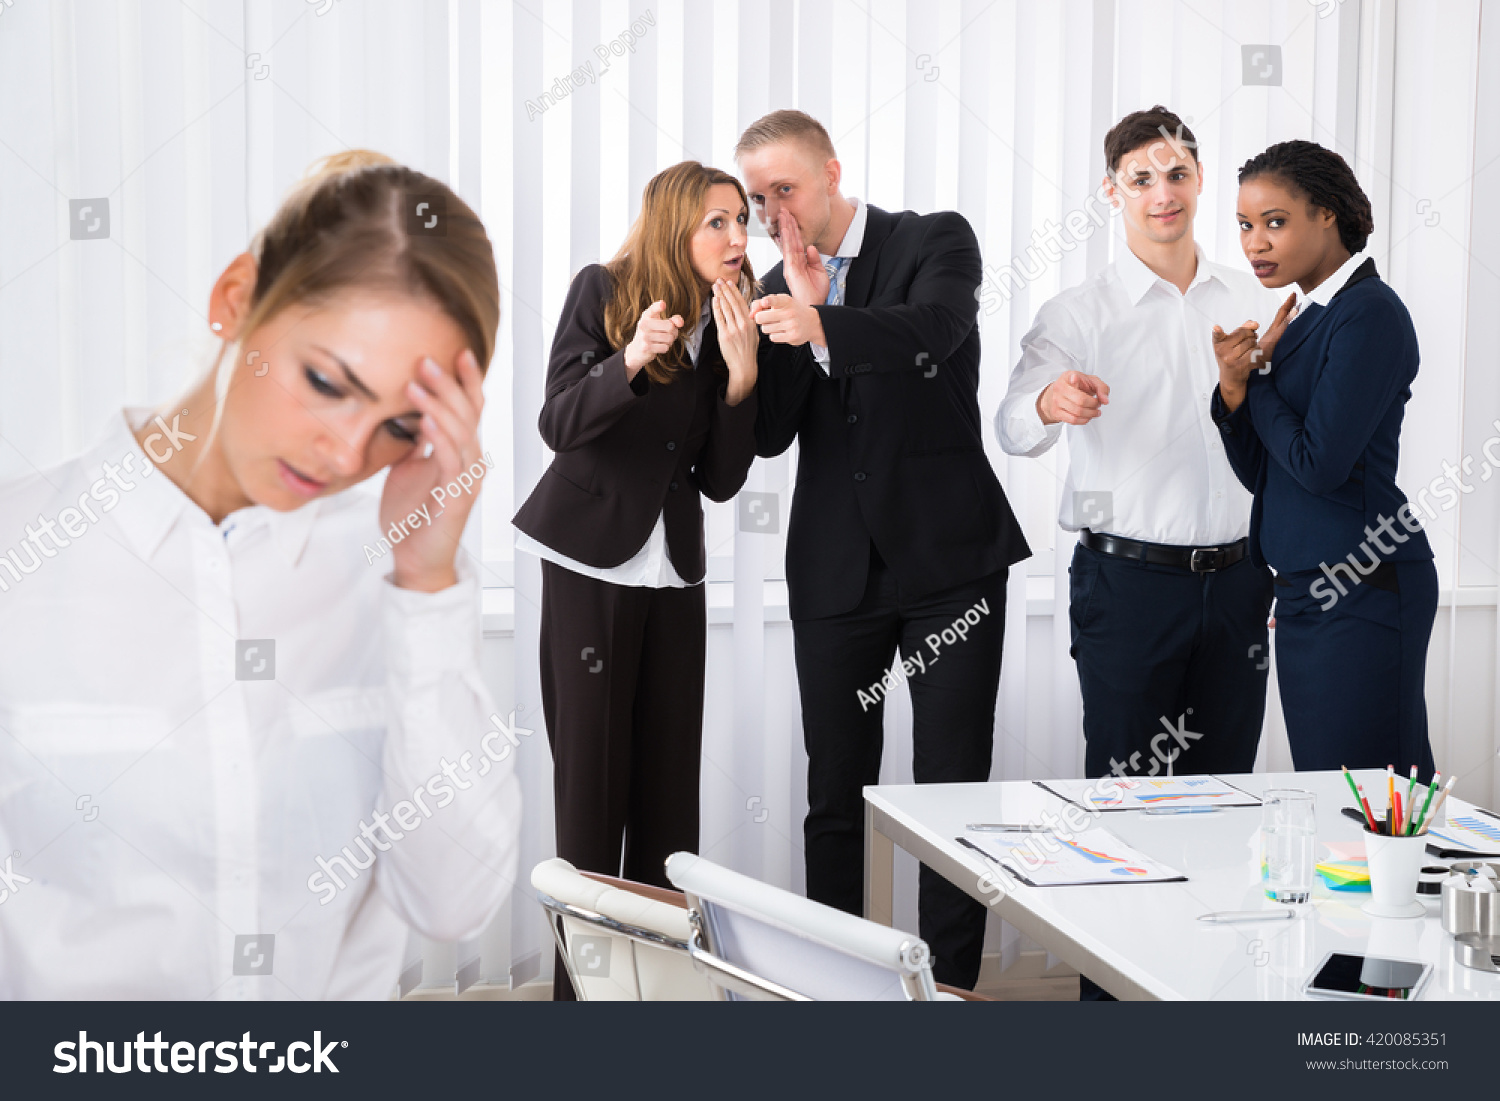 Businesspeople Gossiping Behind Stressed Female Colleague In Office #420085351